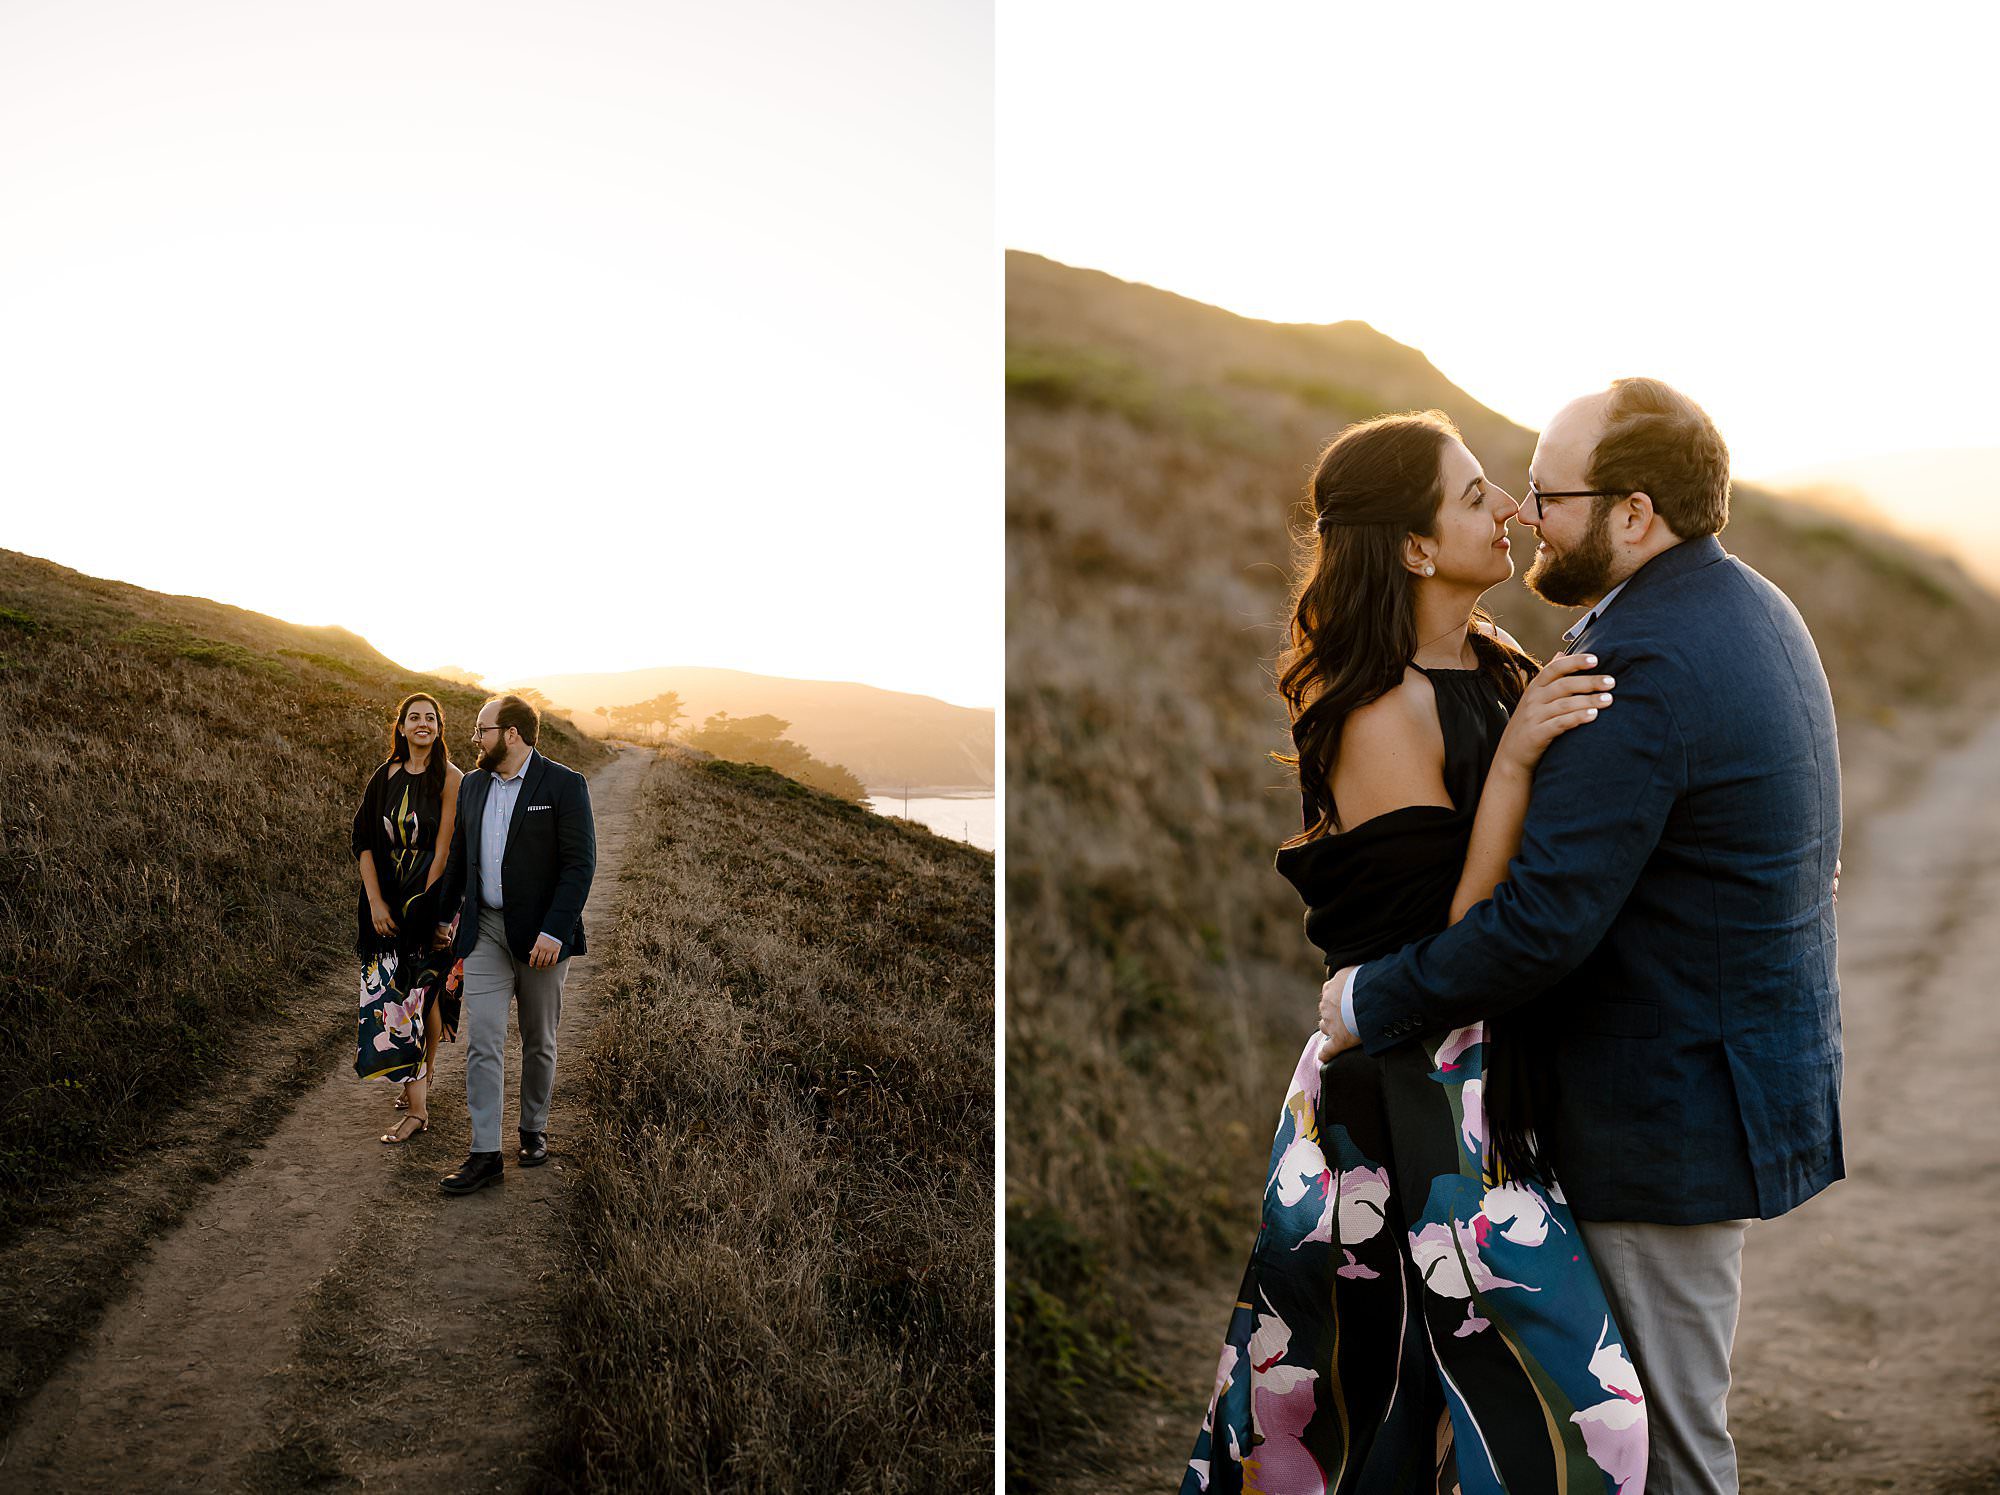 Engaged couple walking the path at sunset on a hike to Chimney Rock in Pt Reyes